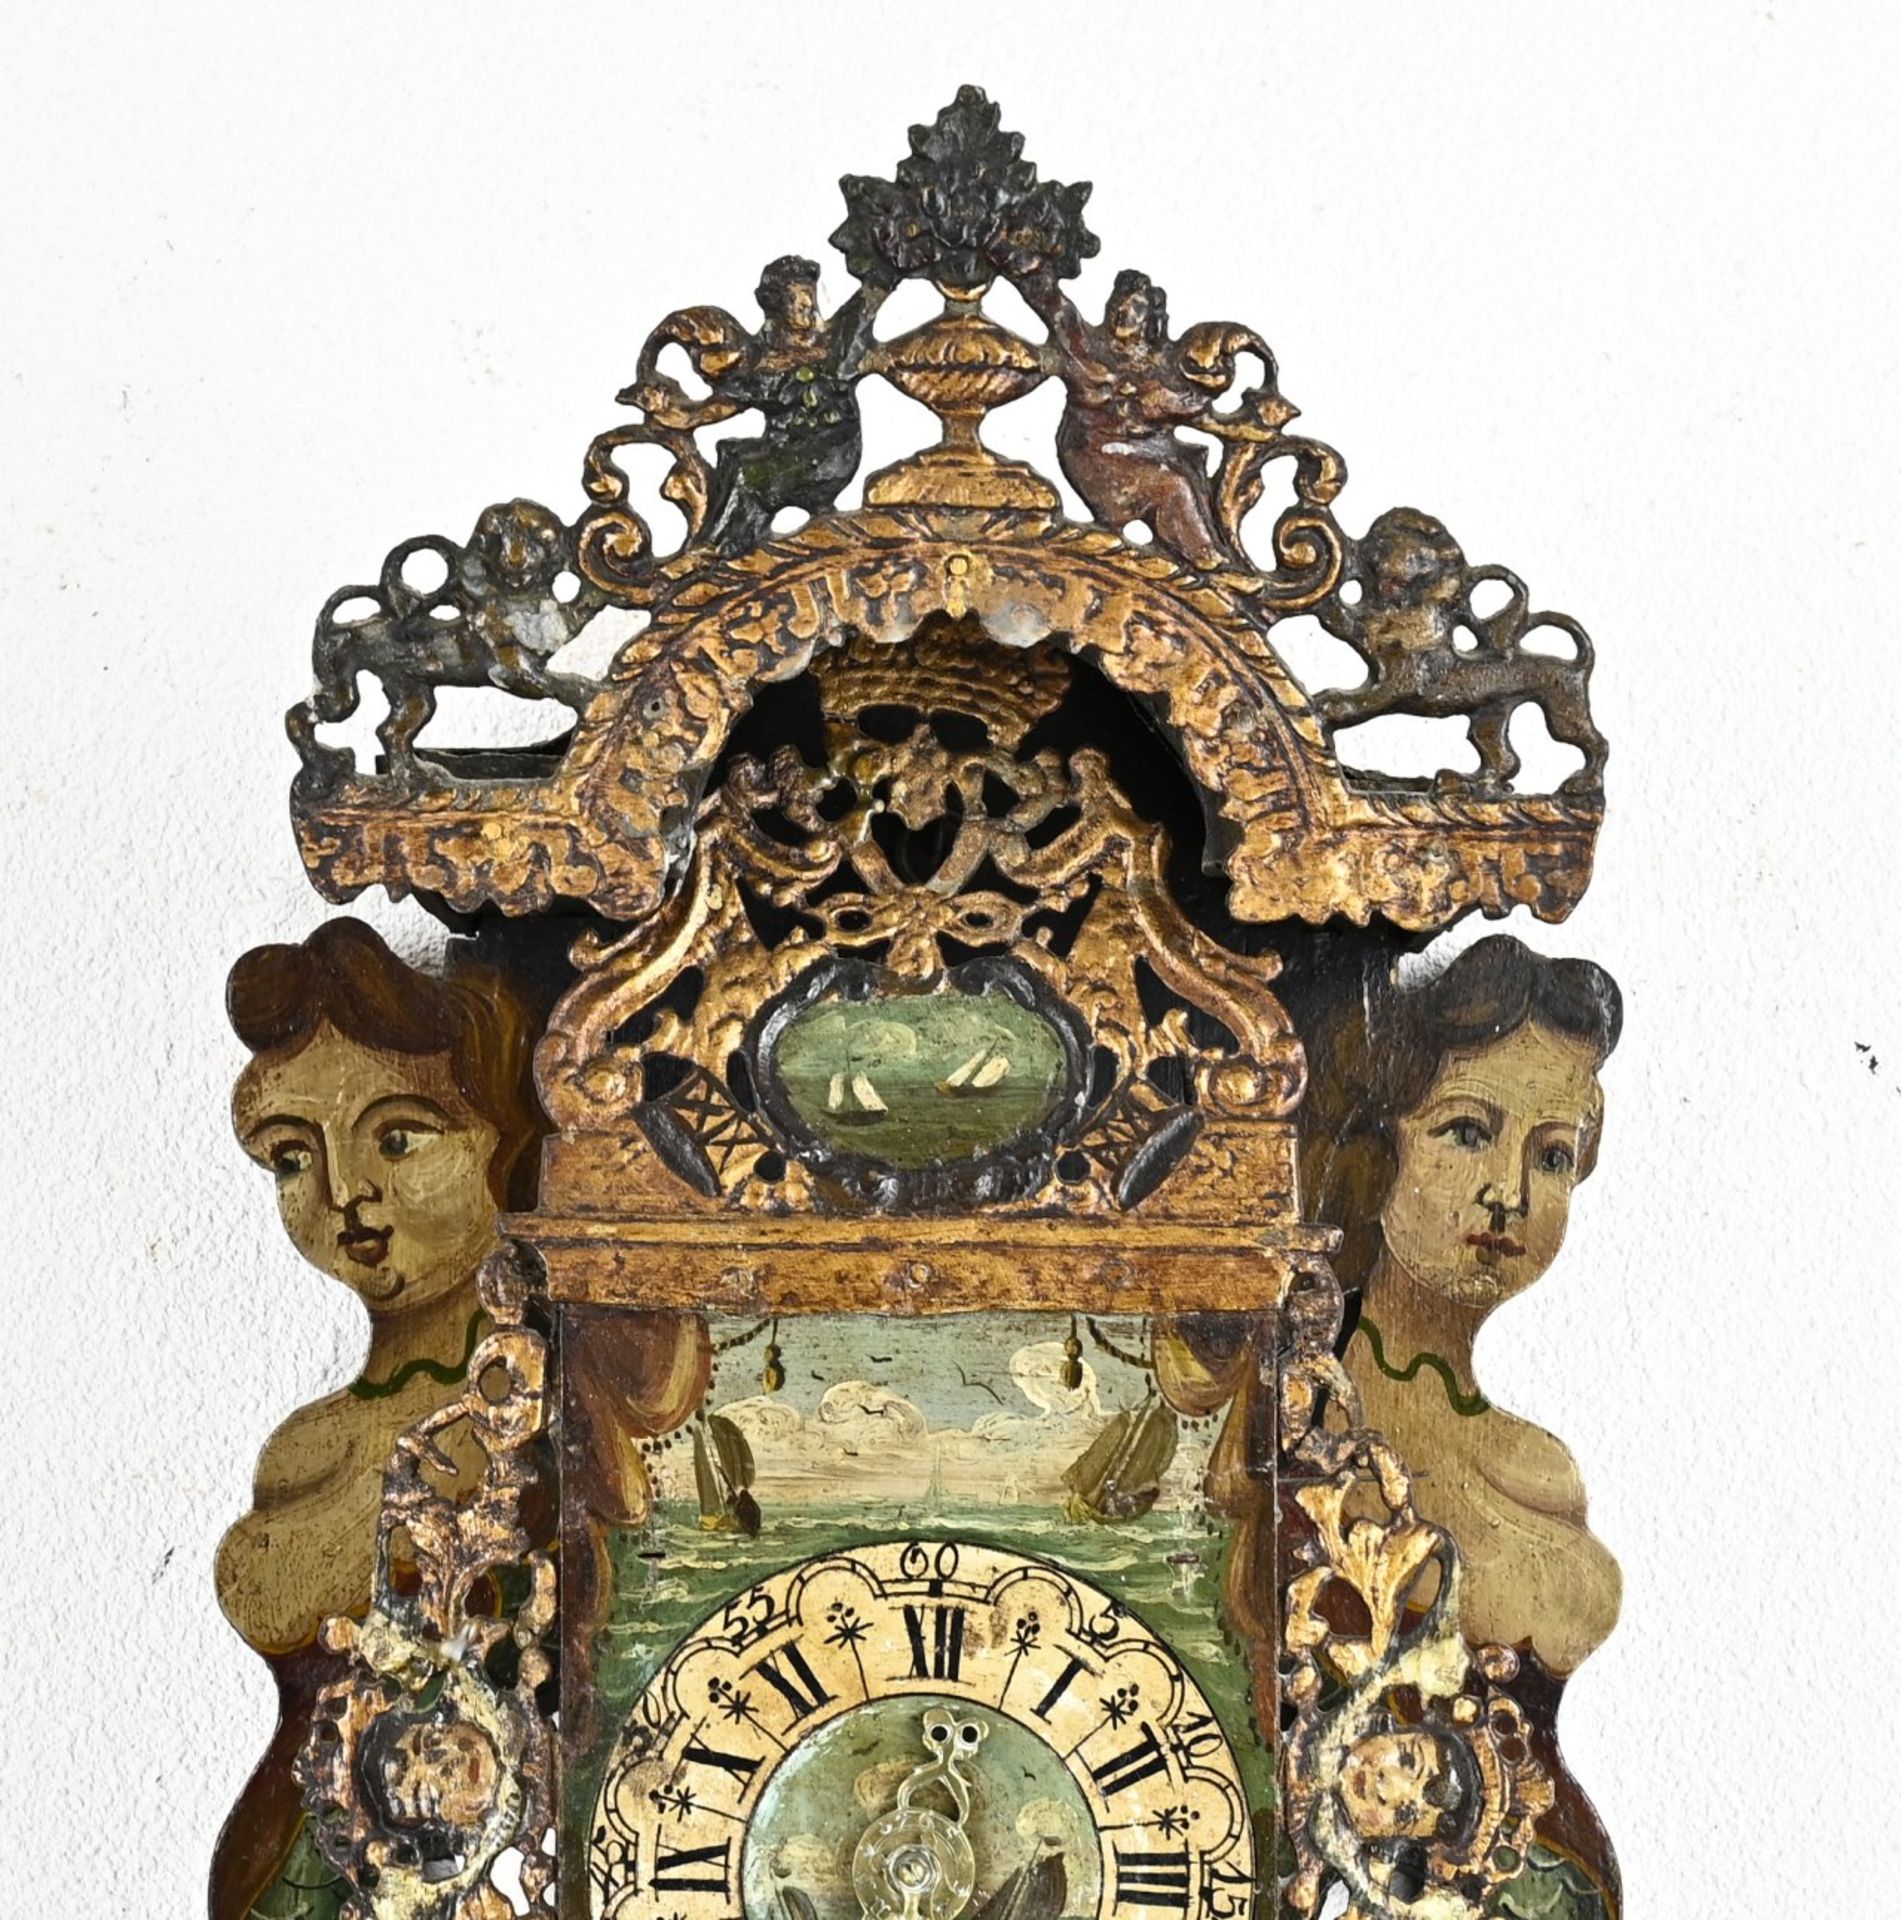 Antique Frisian chair clock - Image 2 of 2